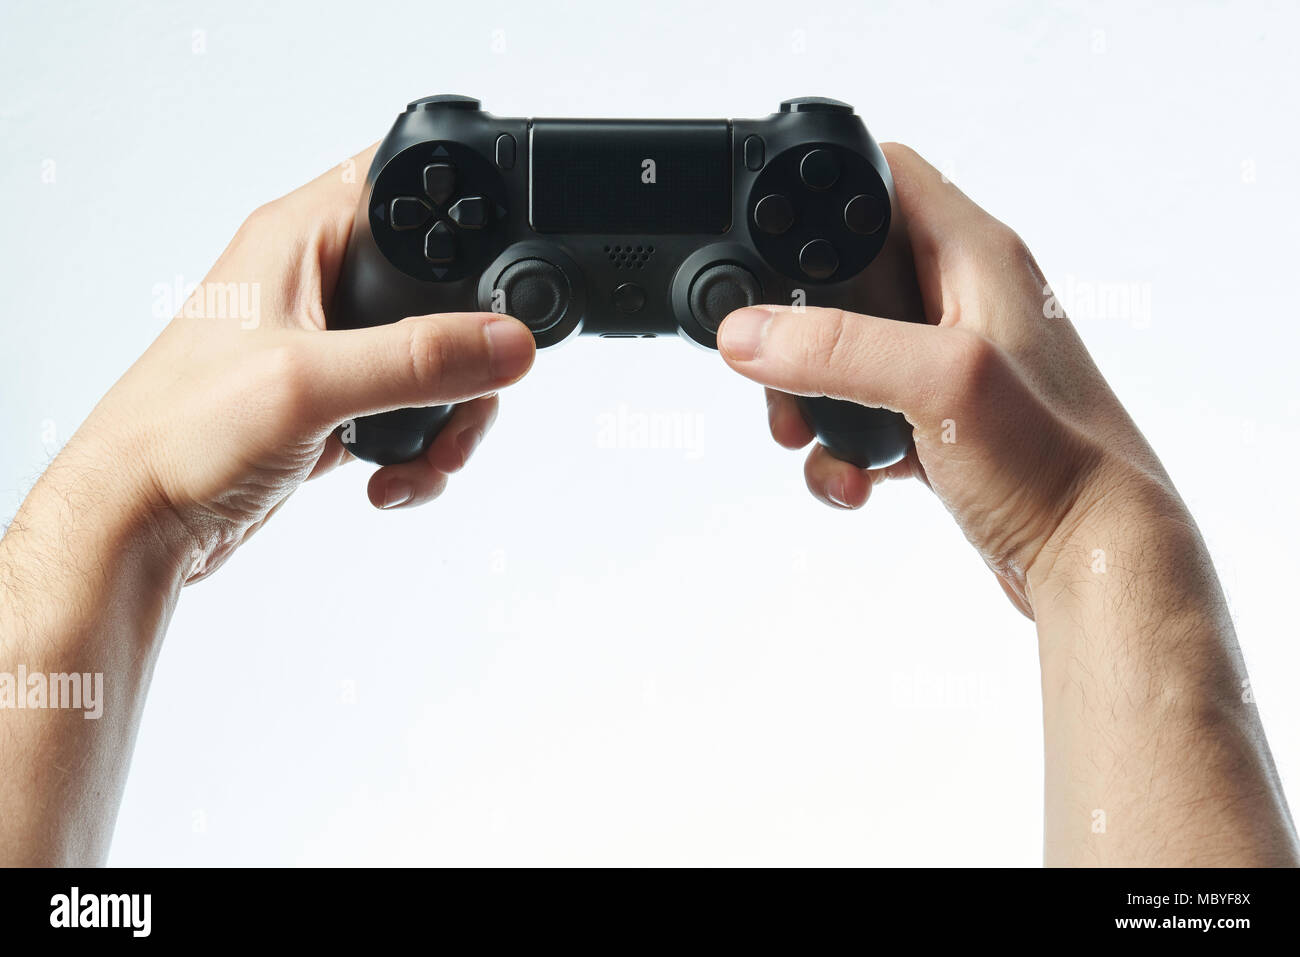 Hands holding black game controller isolated on white background Stock Photo